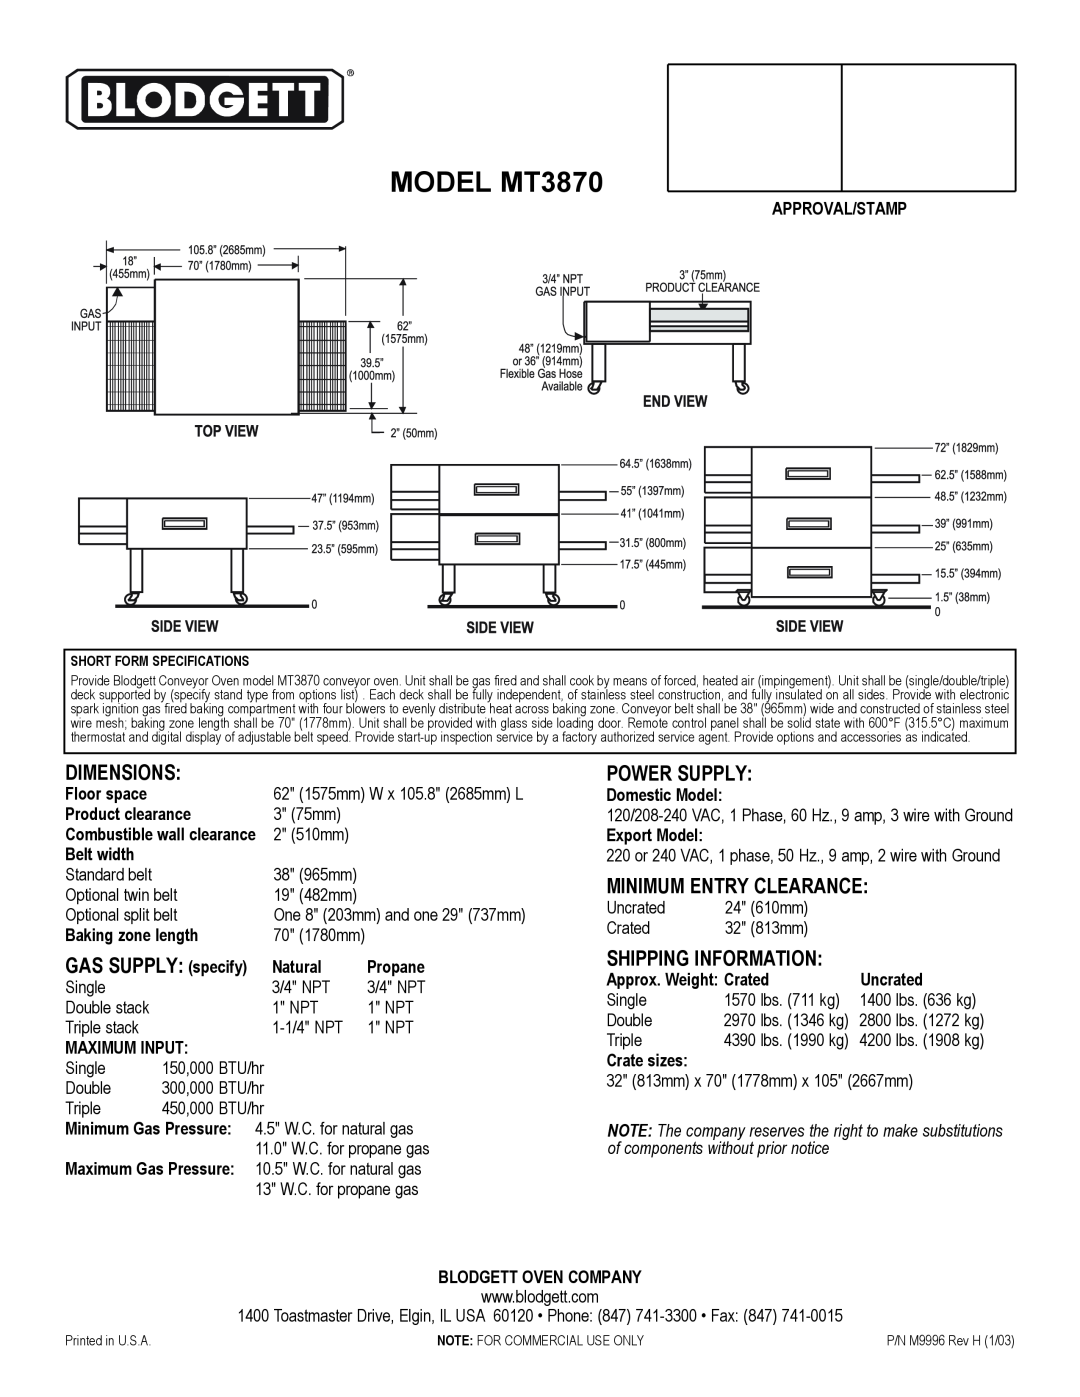 Blodgett Dimensions, Power Supply, Minimum Entry Clearance, GAS SUPPLY specify, Shipping Information, MODEL MT3870 